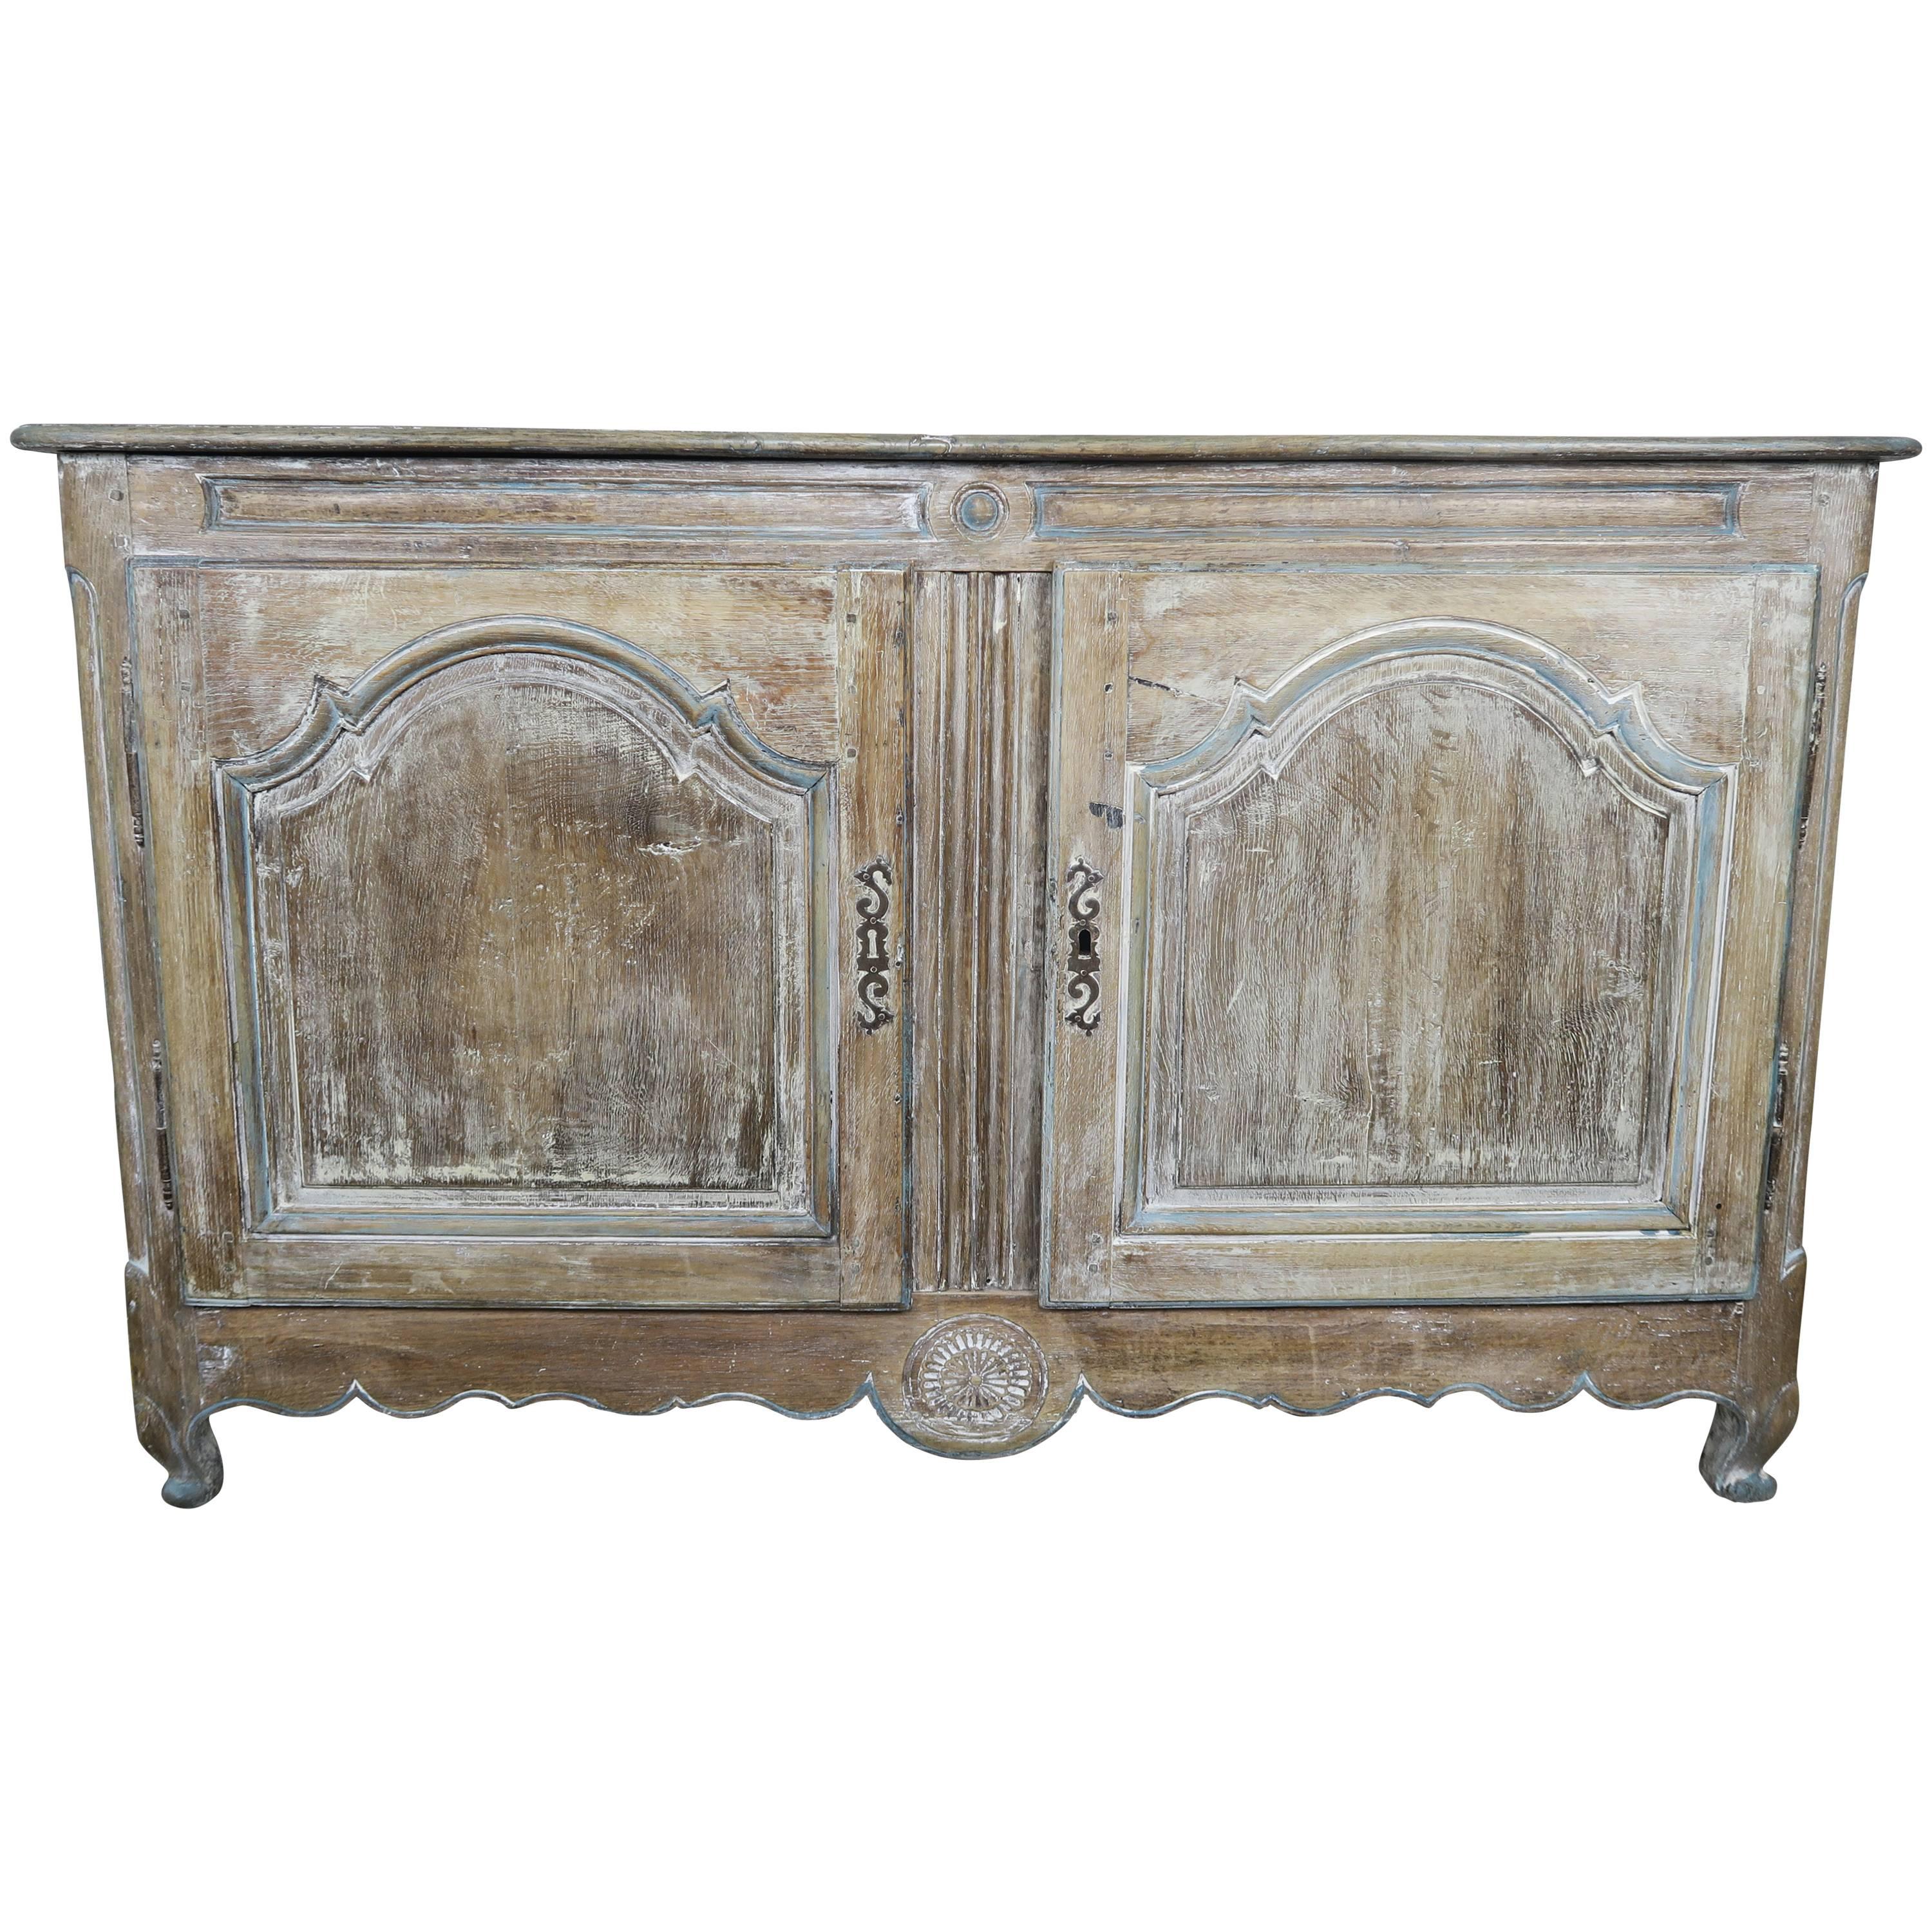 19th Century French Painted Buffet